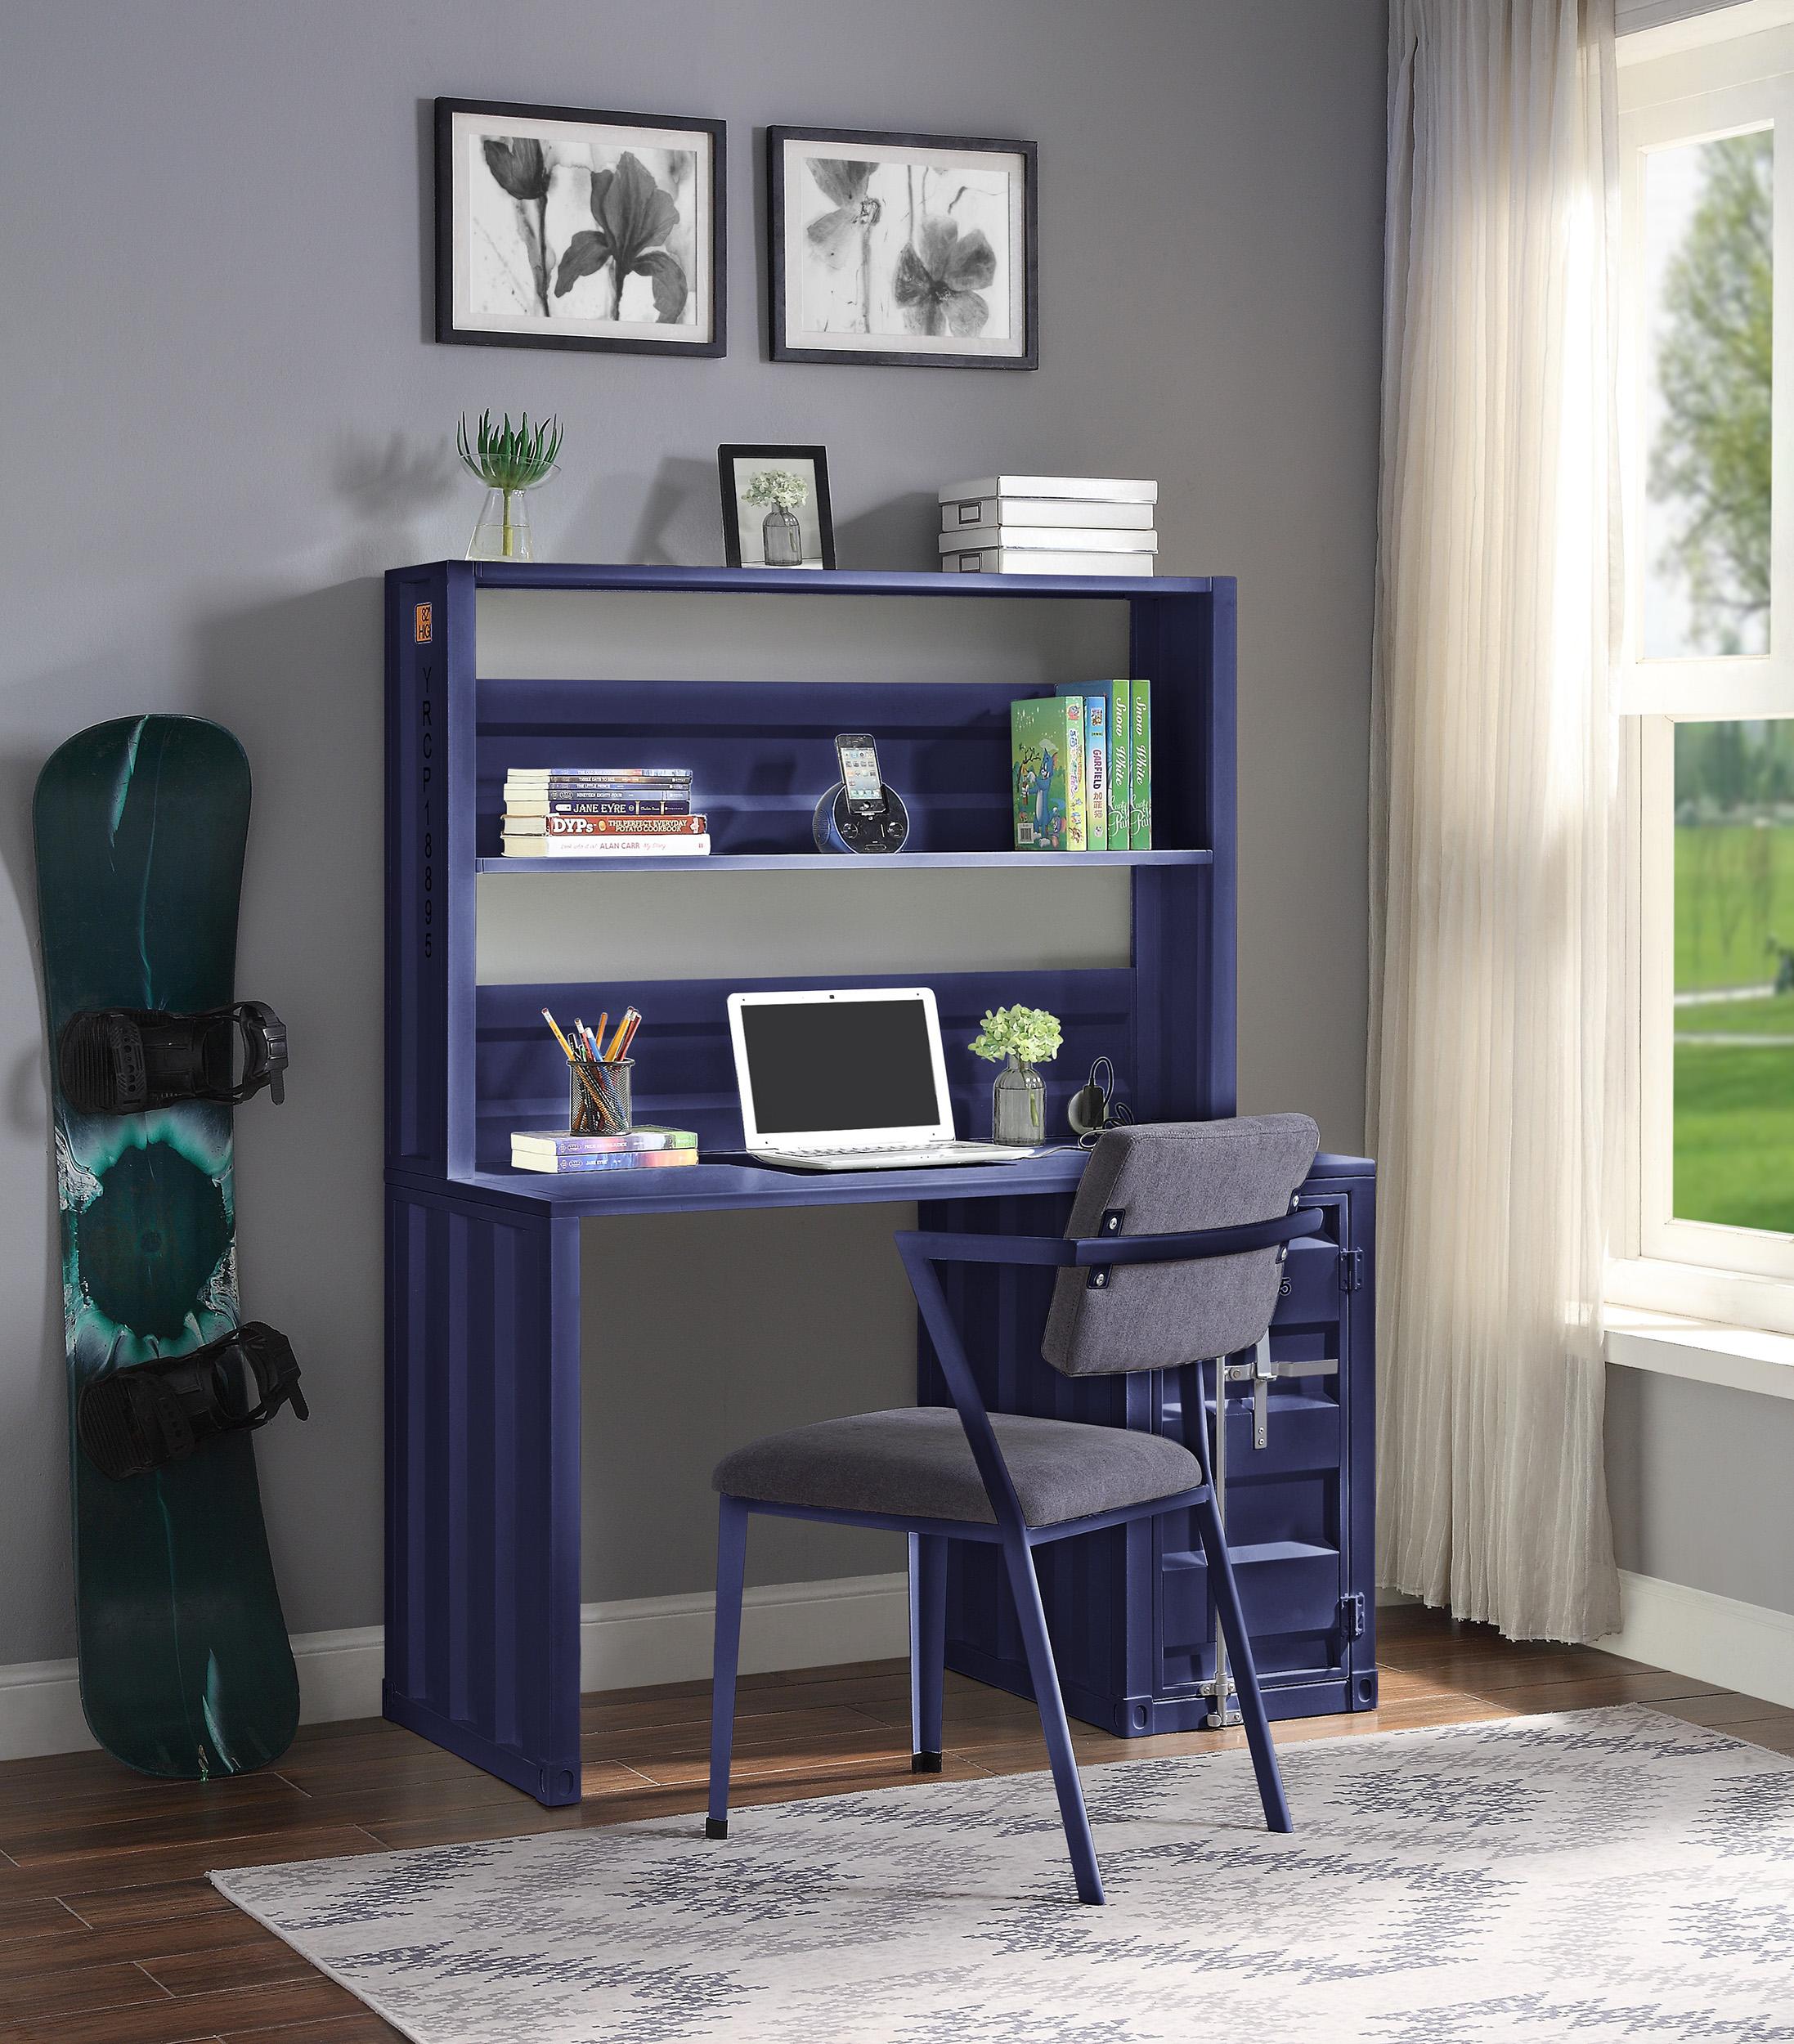 Contemporary, Modern Desk with Chair Cargo 37907-2pcs in Blue Fabric